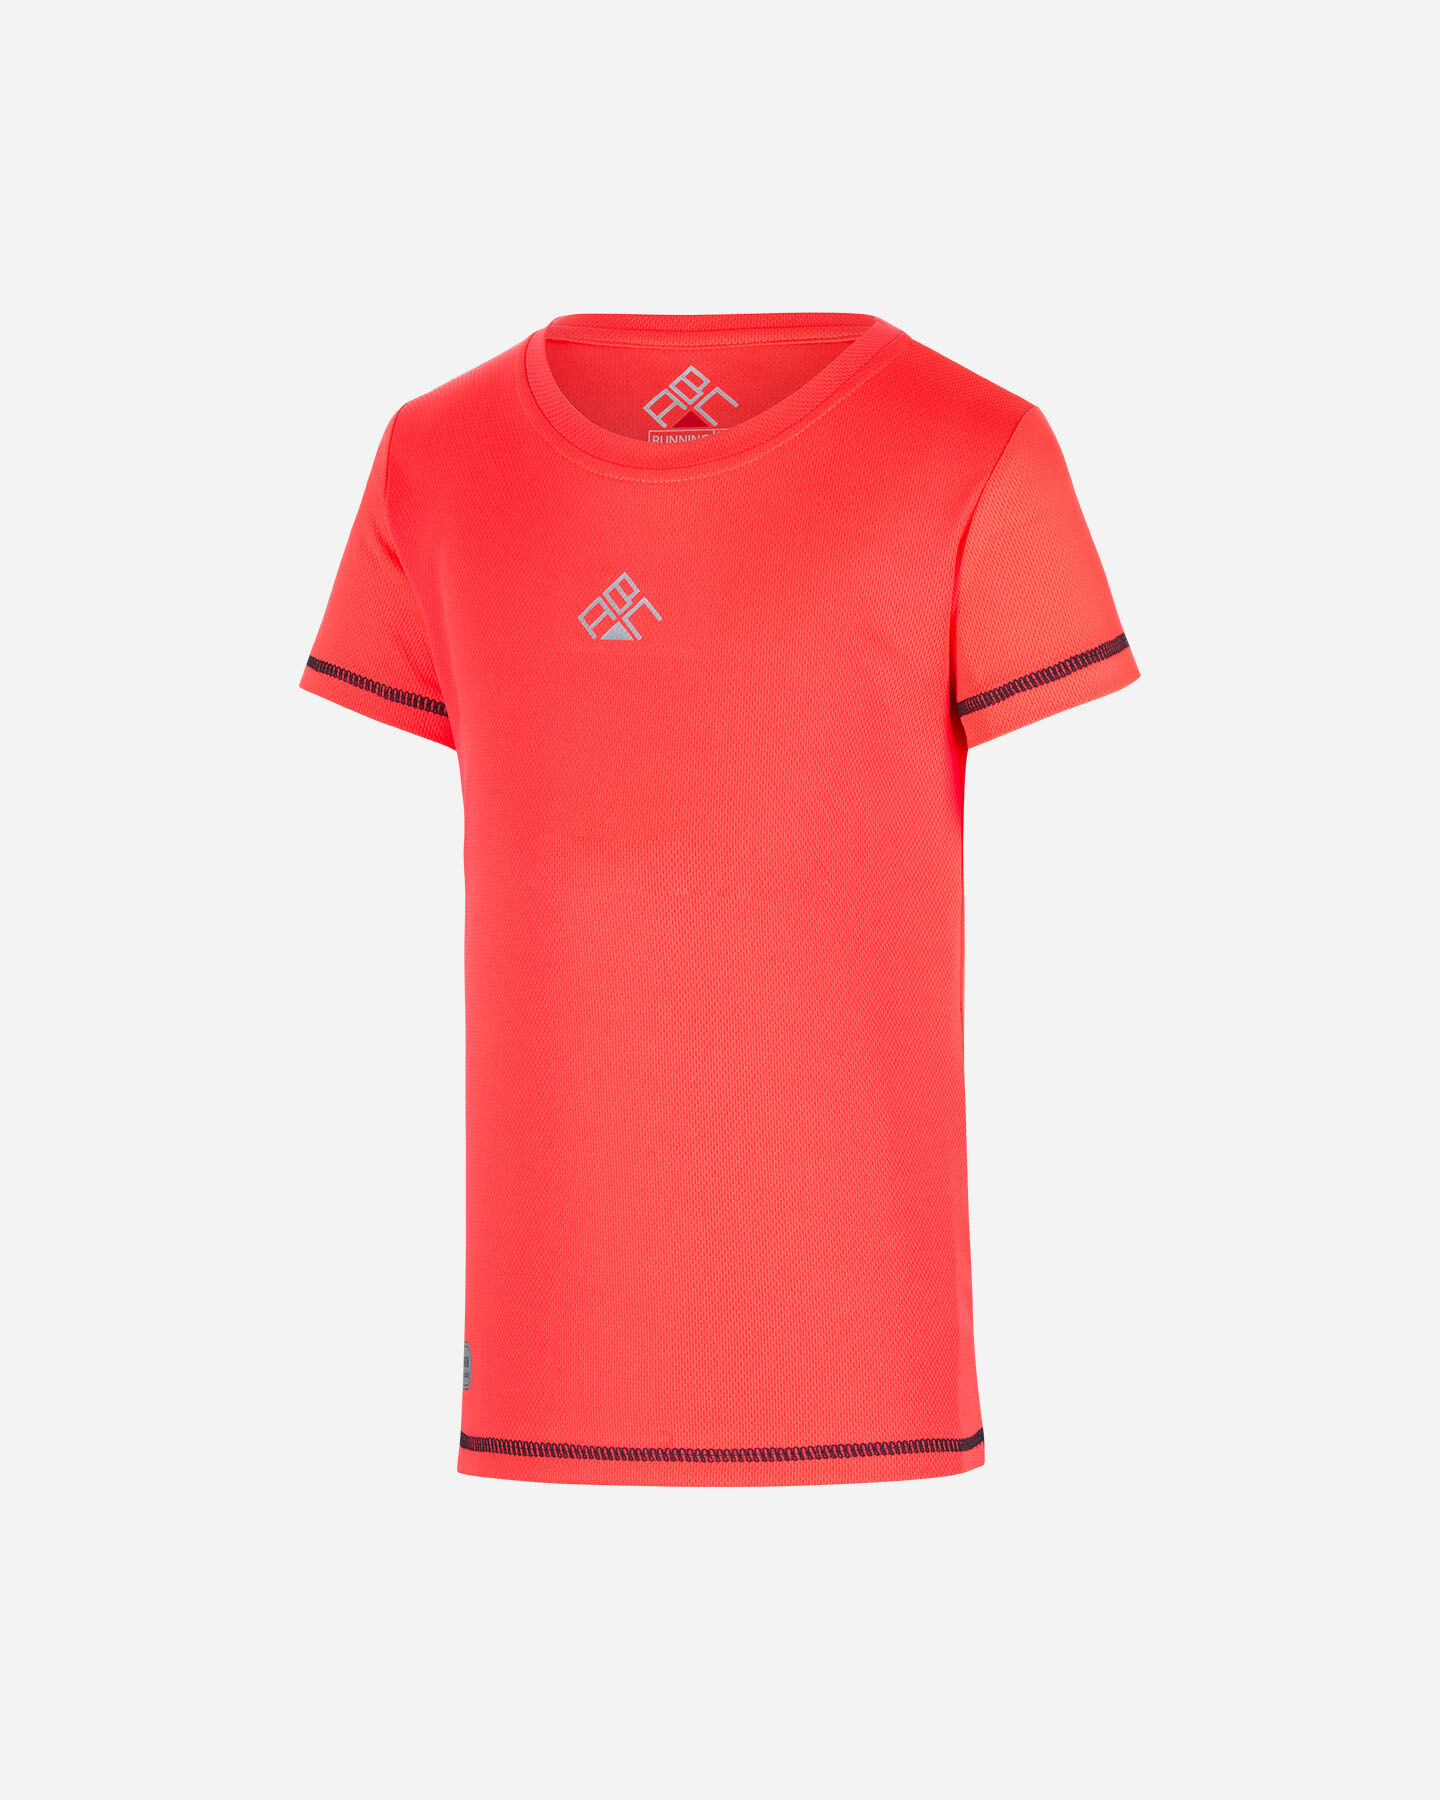  T-Shirt running ABC RUN NEW W S4075118|1036/929|8A scatto 0